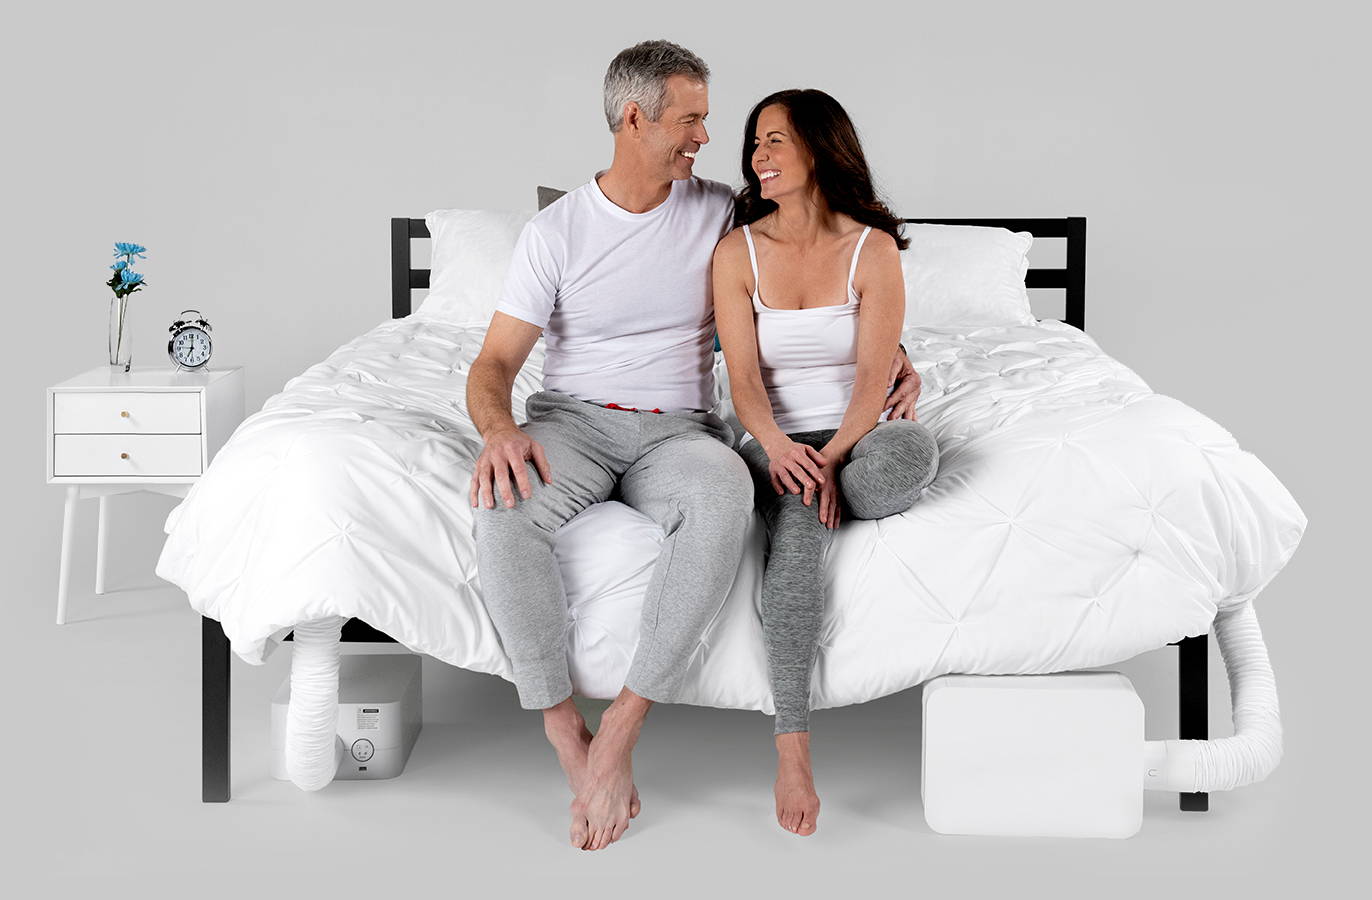 An image of an older couple sitting on the edge of the bed, looking at each other and smiling, and two BedJet units are hooked up to the bed, one on each side.